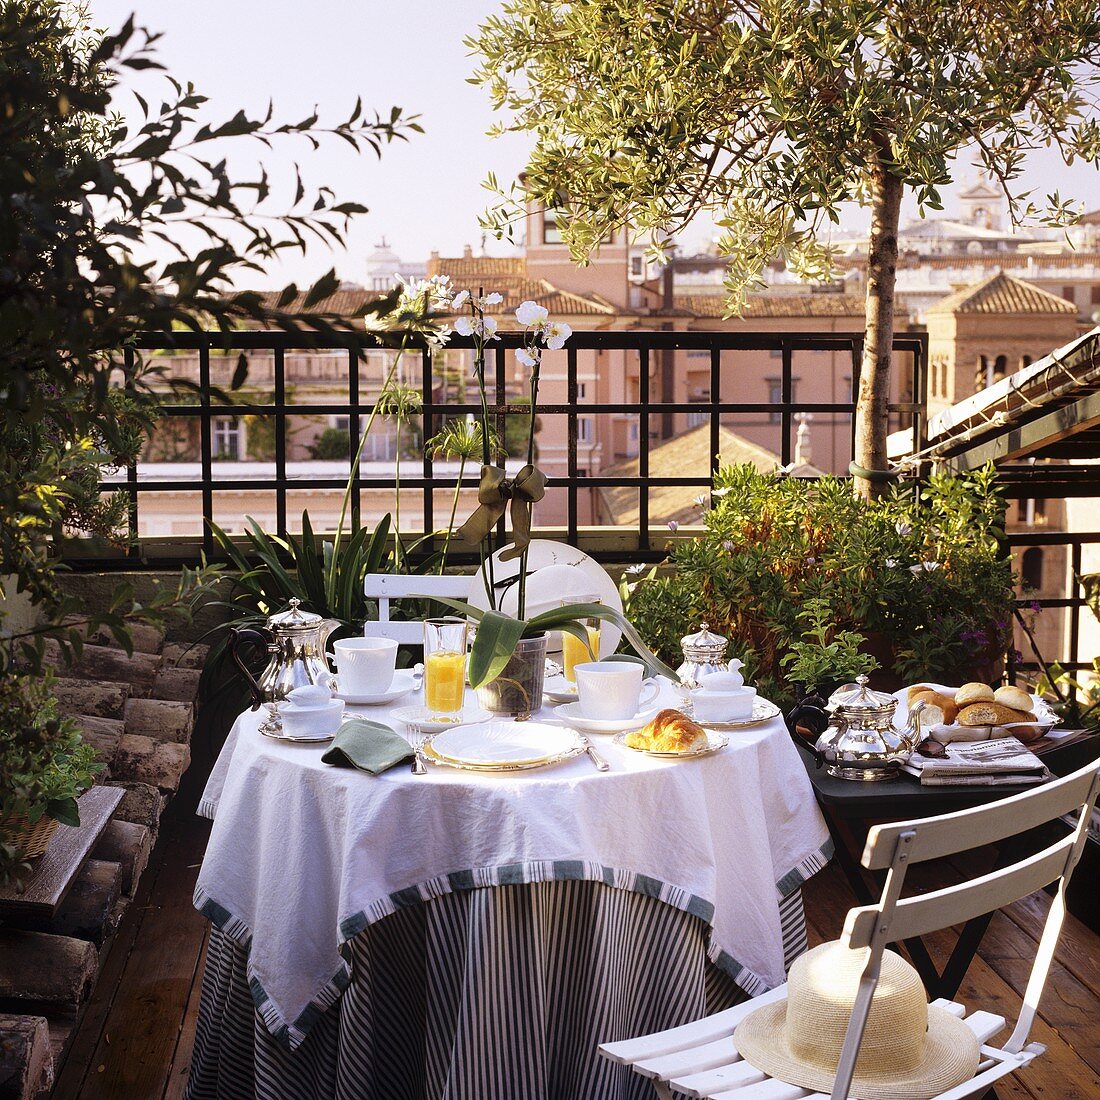 Breakfast outside - a table laid on a Southern roof terrace